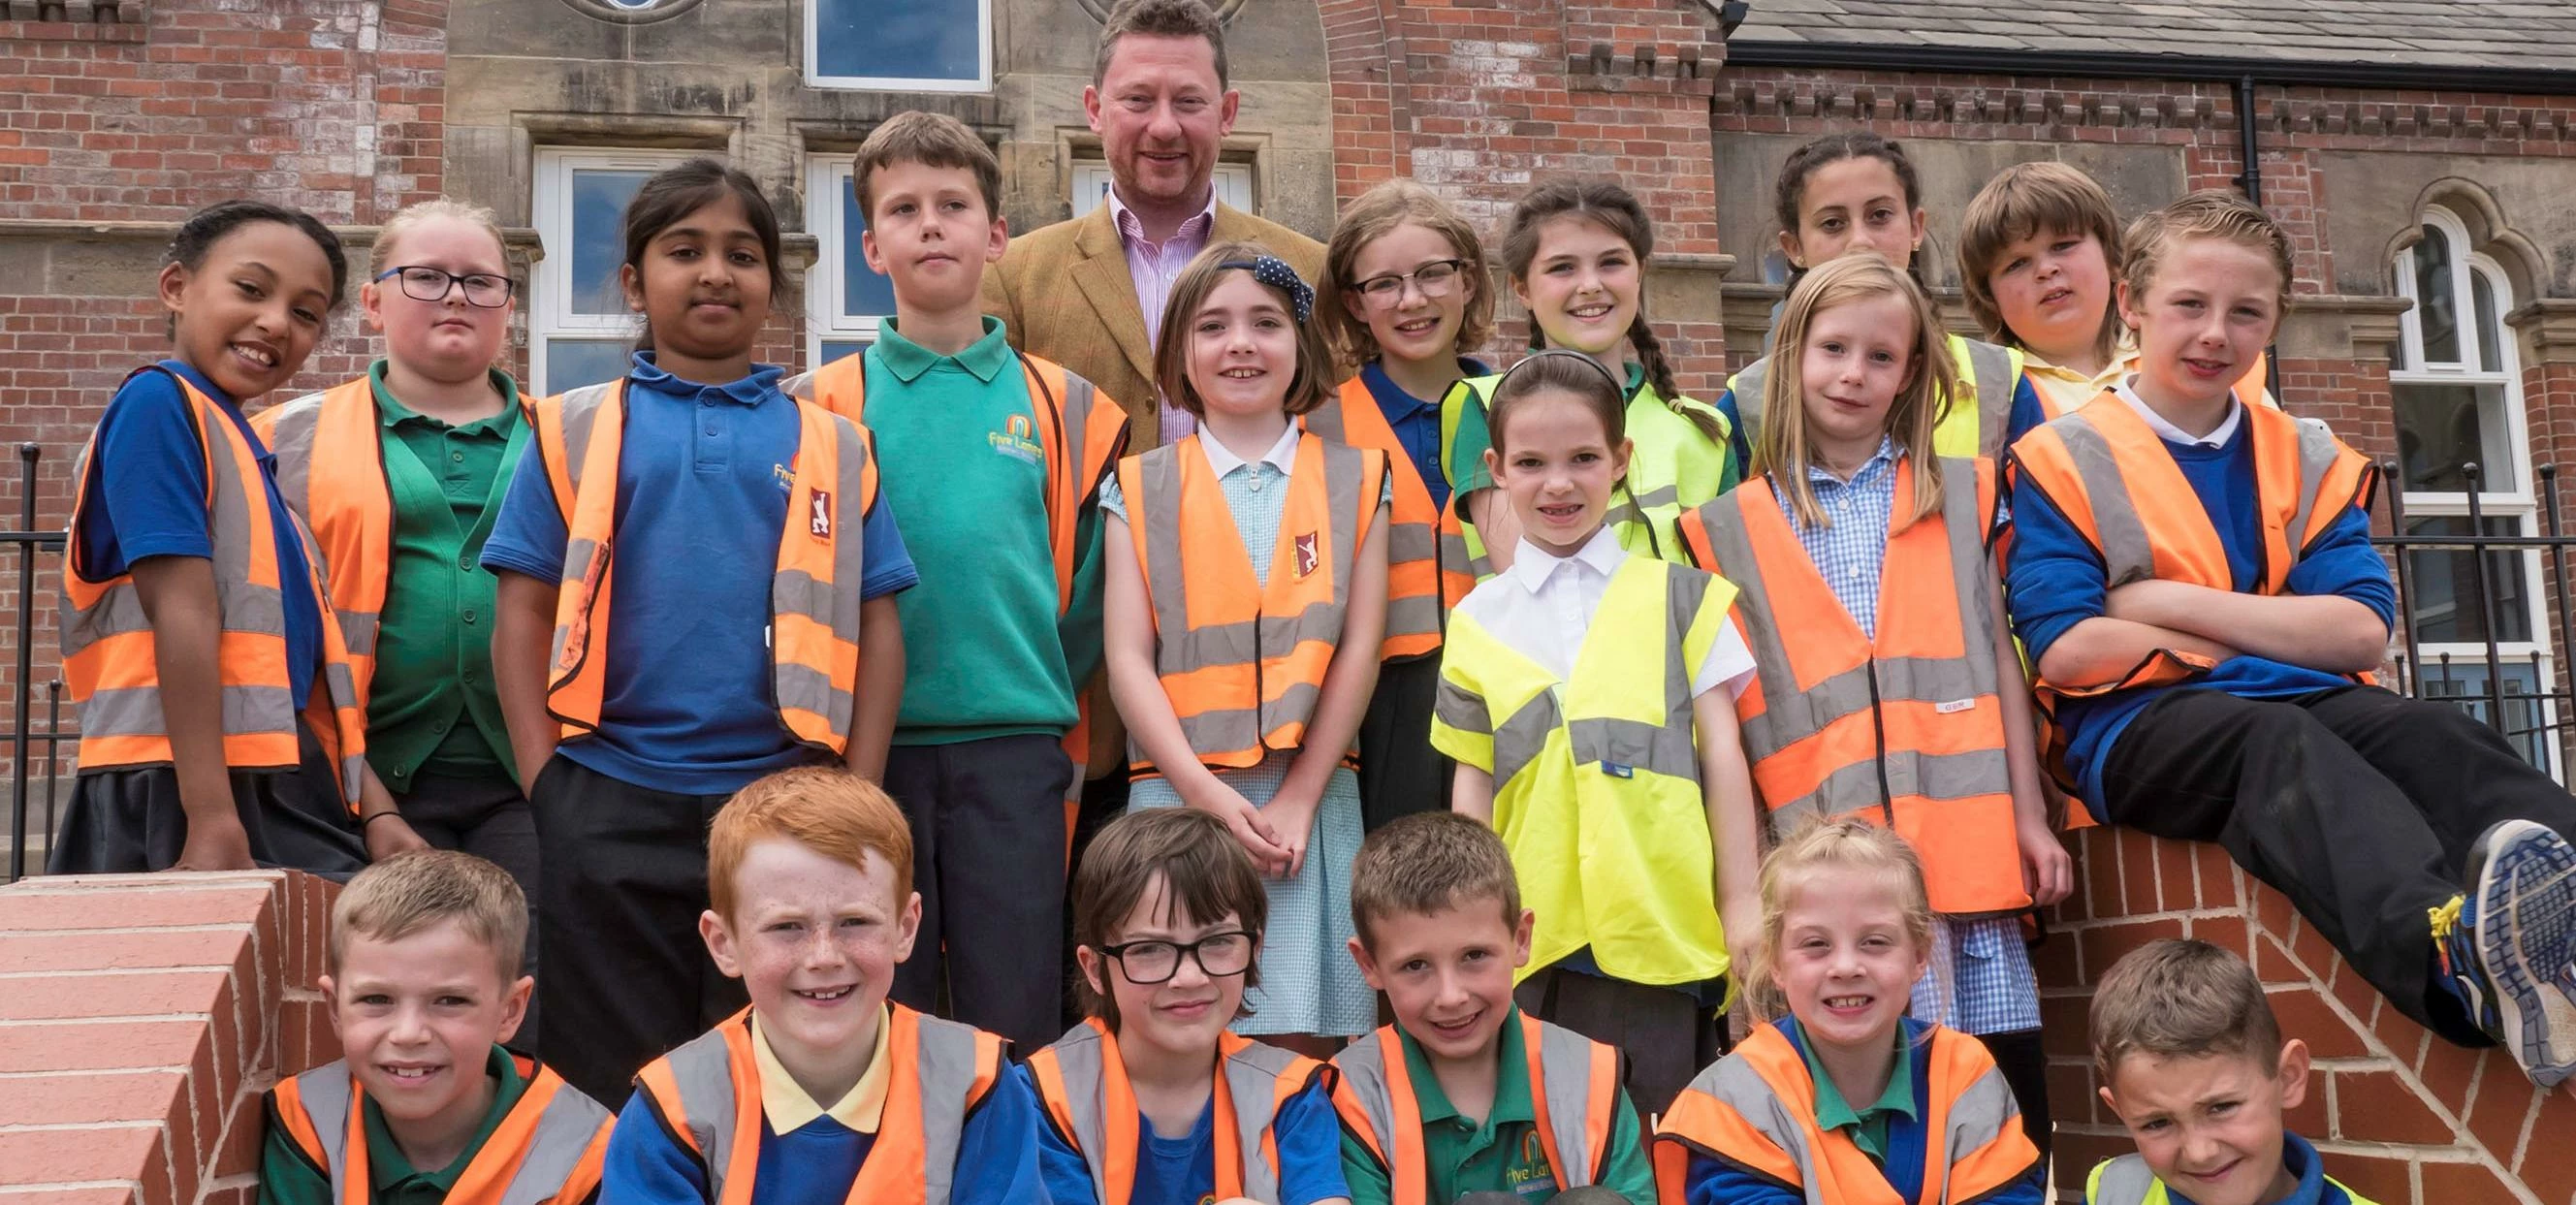 Tim Reeve from Advent Developments with pupils from Five Lanes Primary School